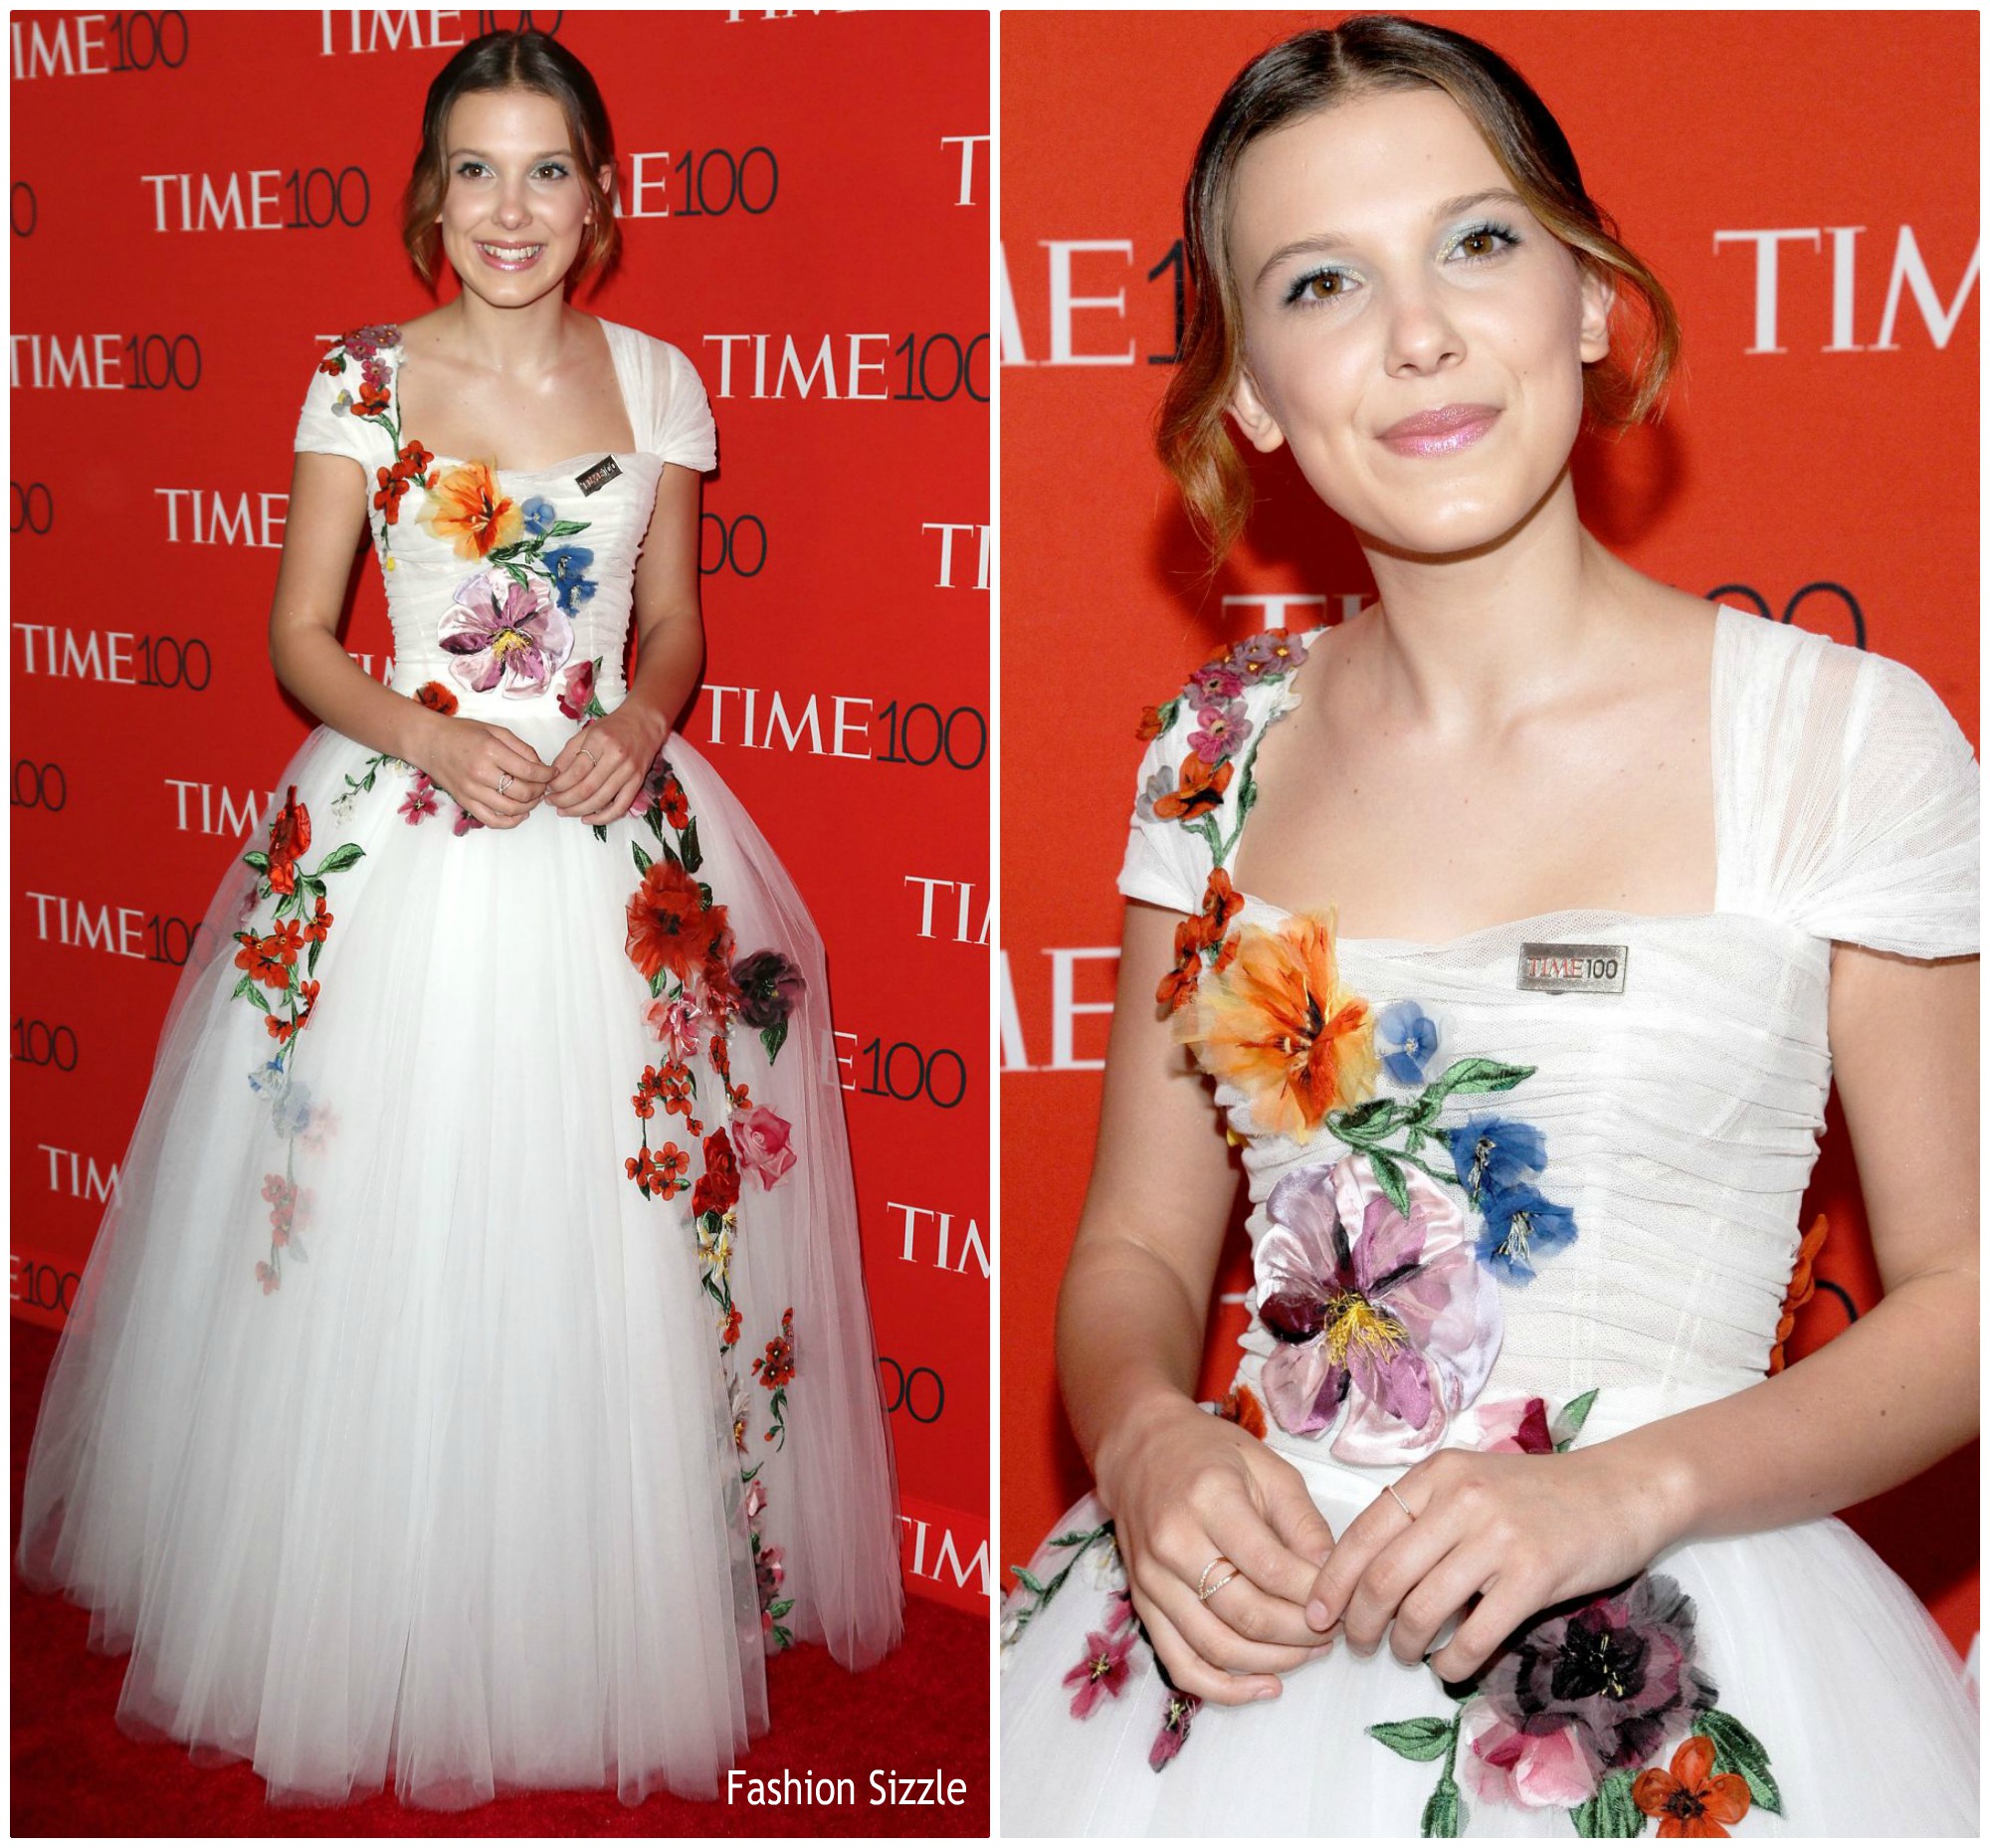 millie-bobby-brown-in-dolce-gabbana-2018-time-100-gala